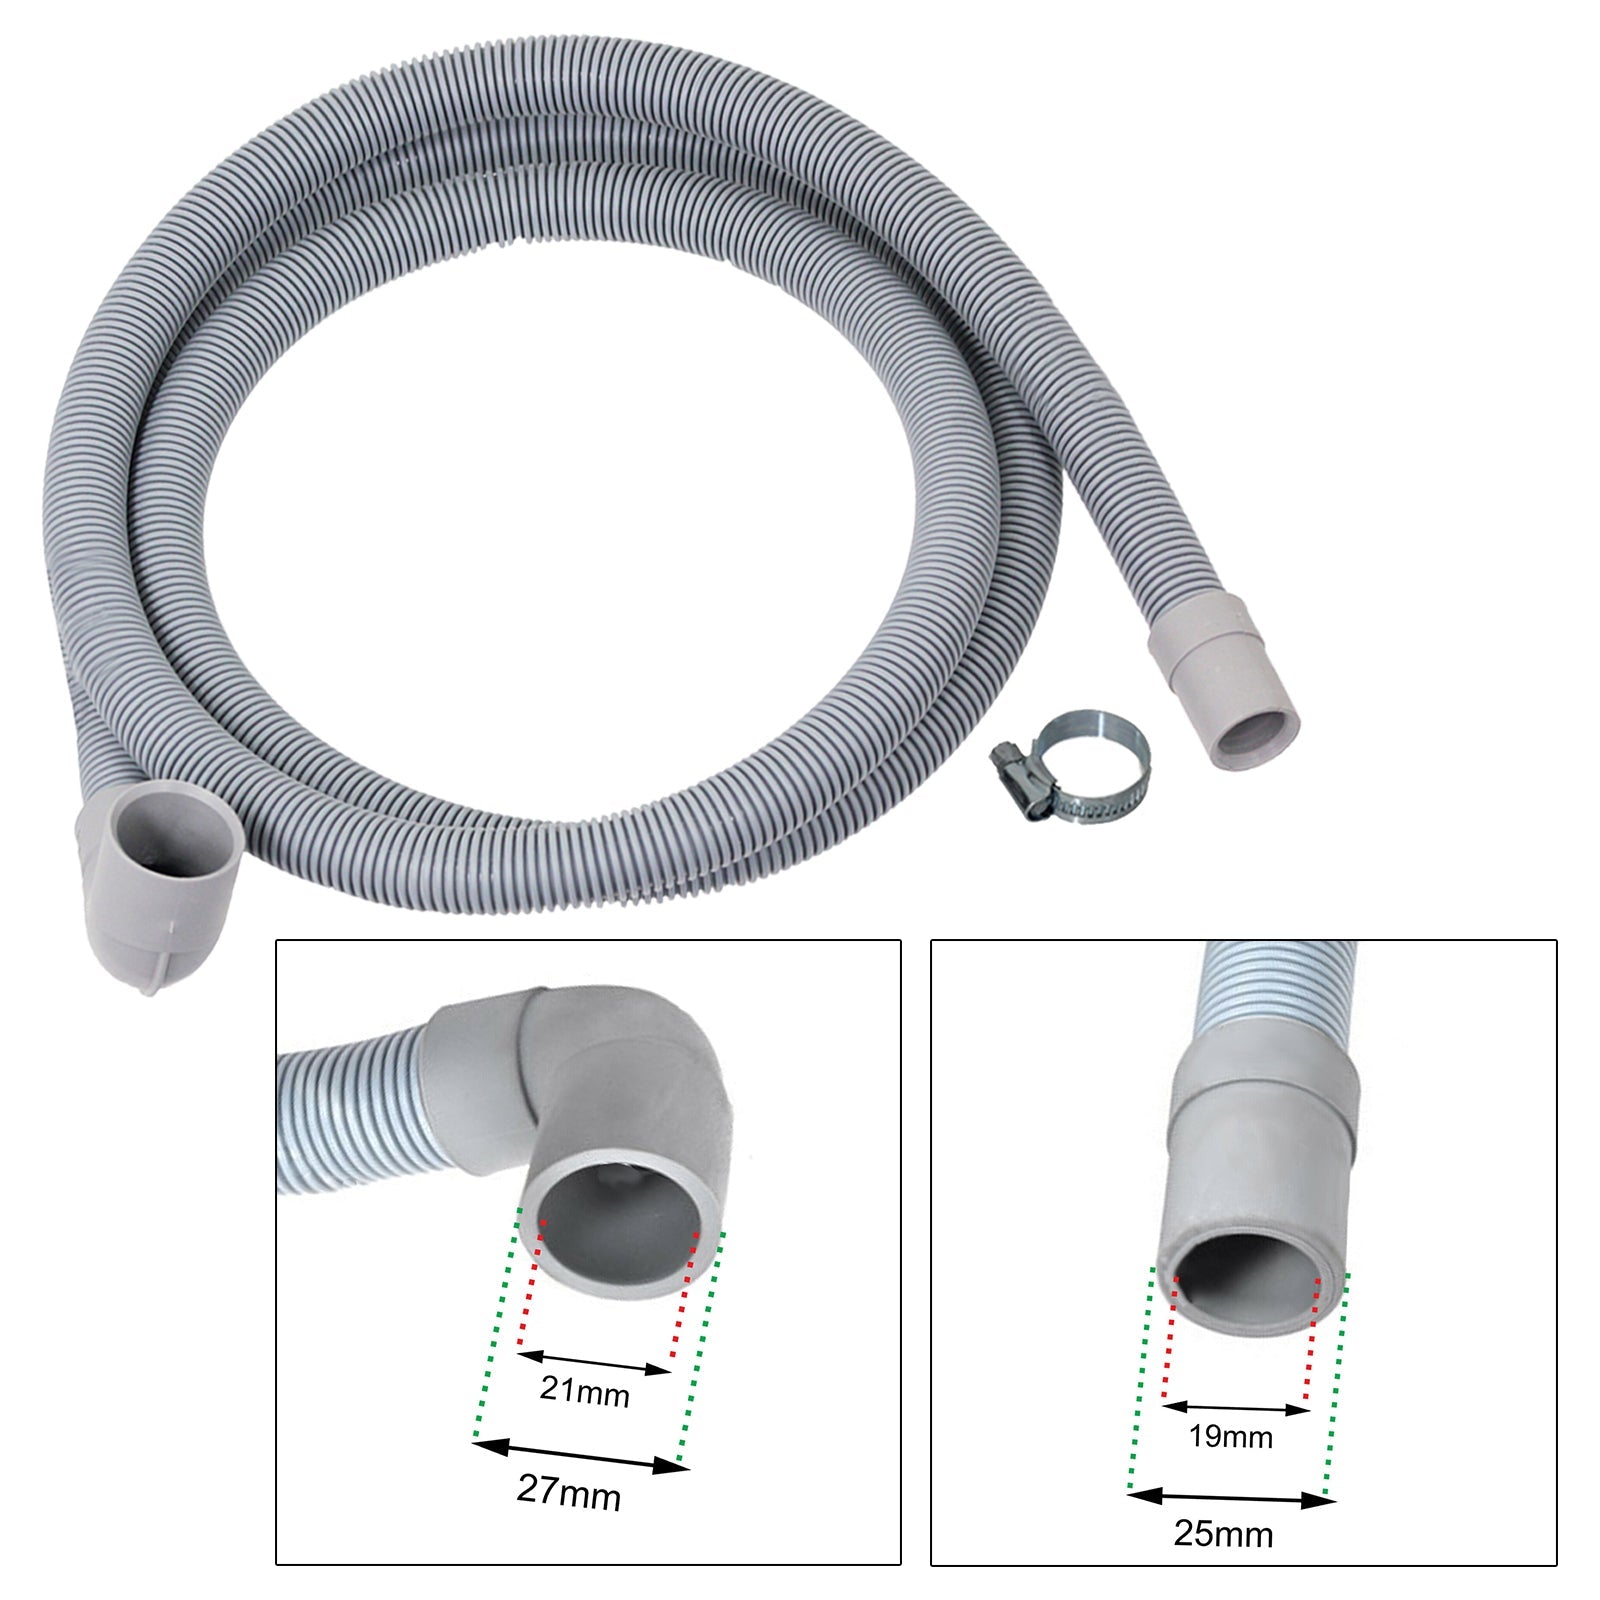 Fill Hose + Drain Hose Extension Set for HOOVER CANDY Washing Machine & Dishwasher 5m + 5m (+ PTFE Tape)